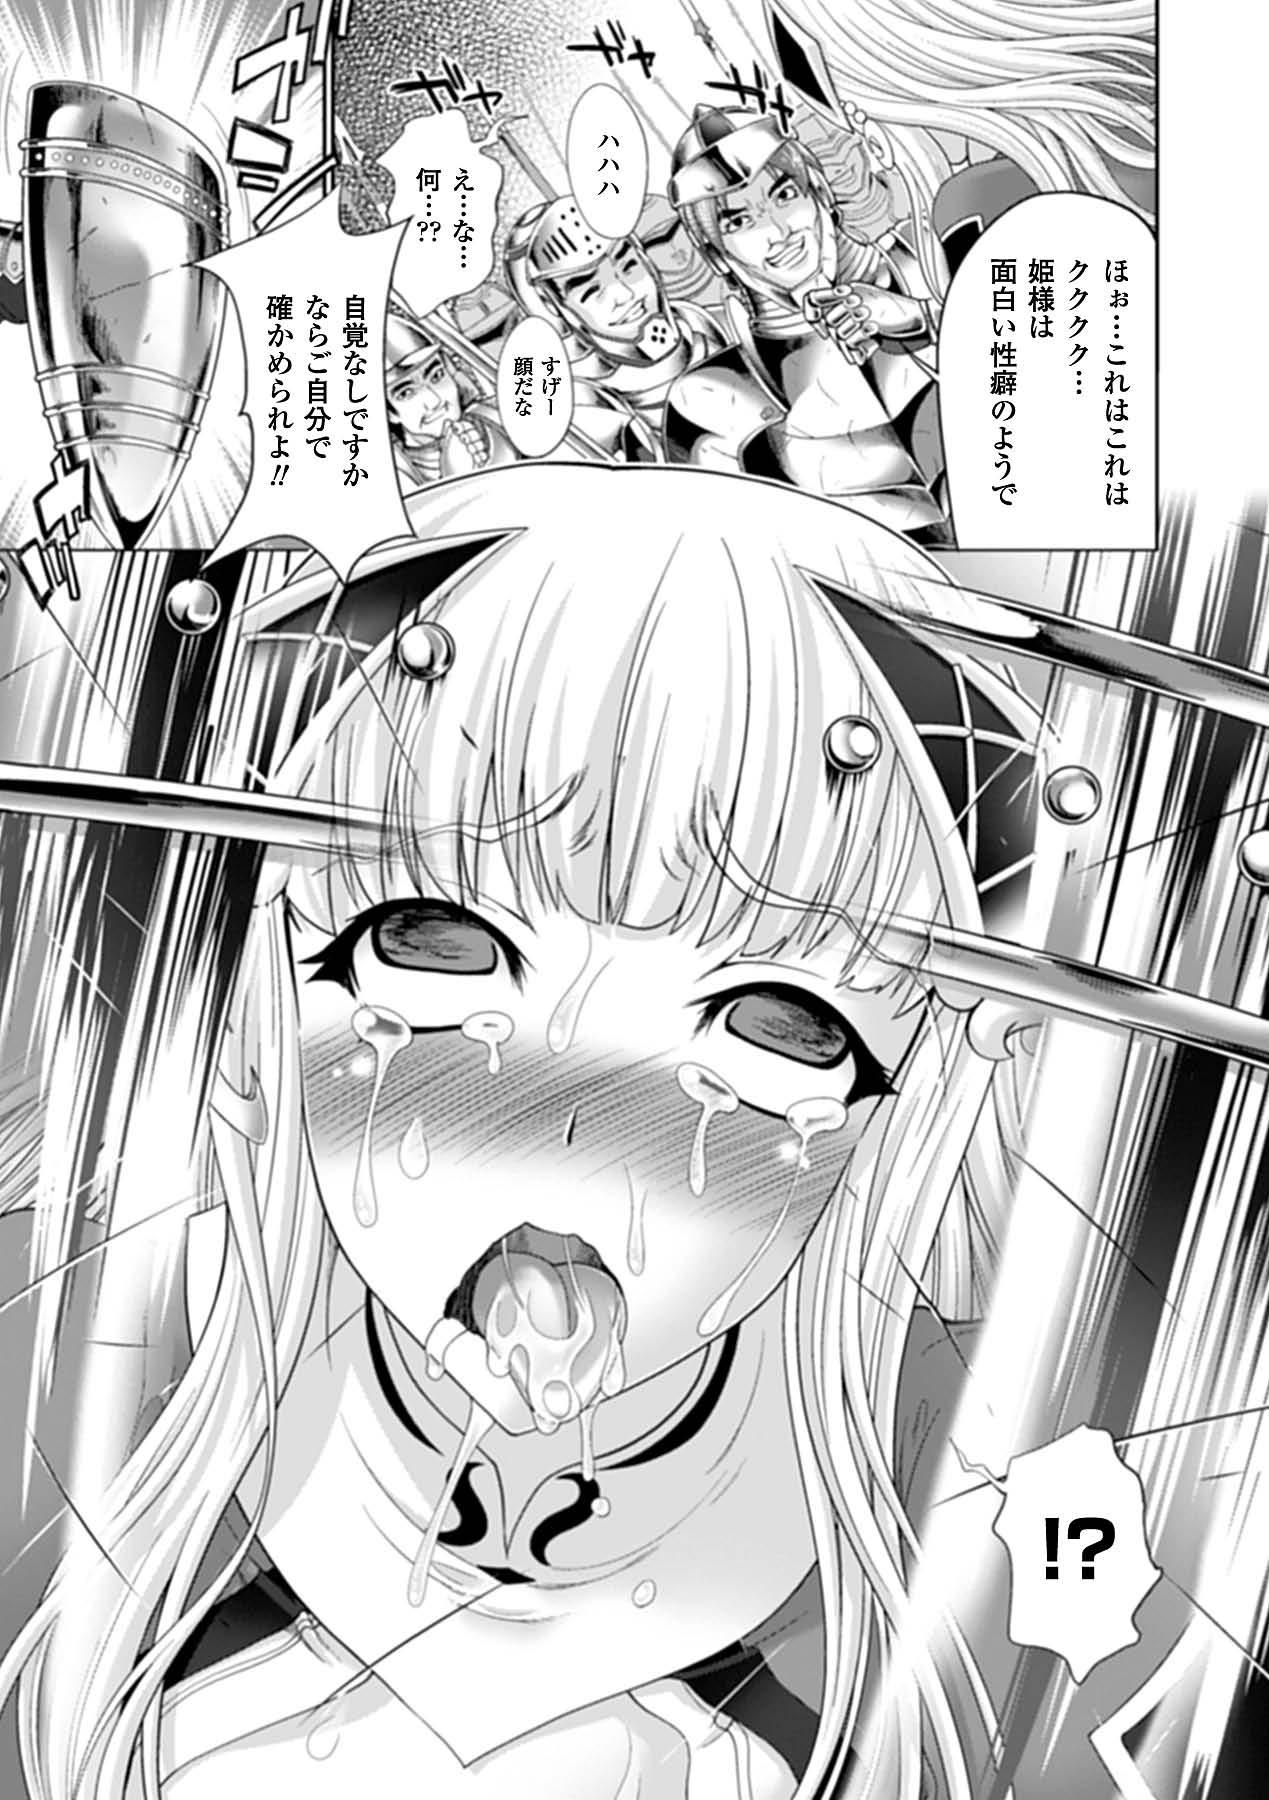 Sharing Ahegao Anthology Comics Vol. 3 Swallowing - Page 9